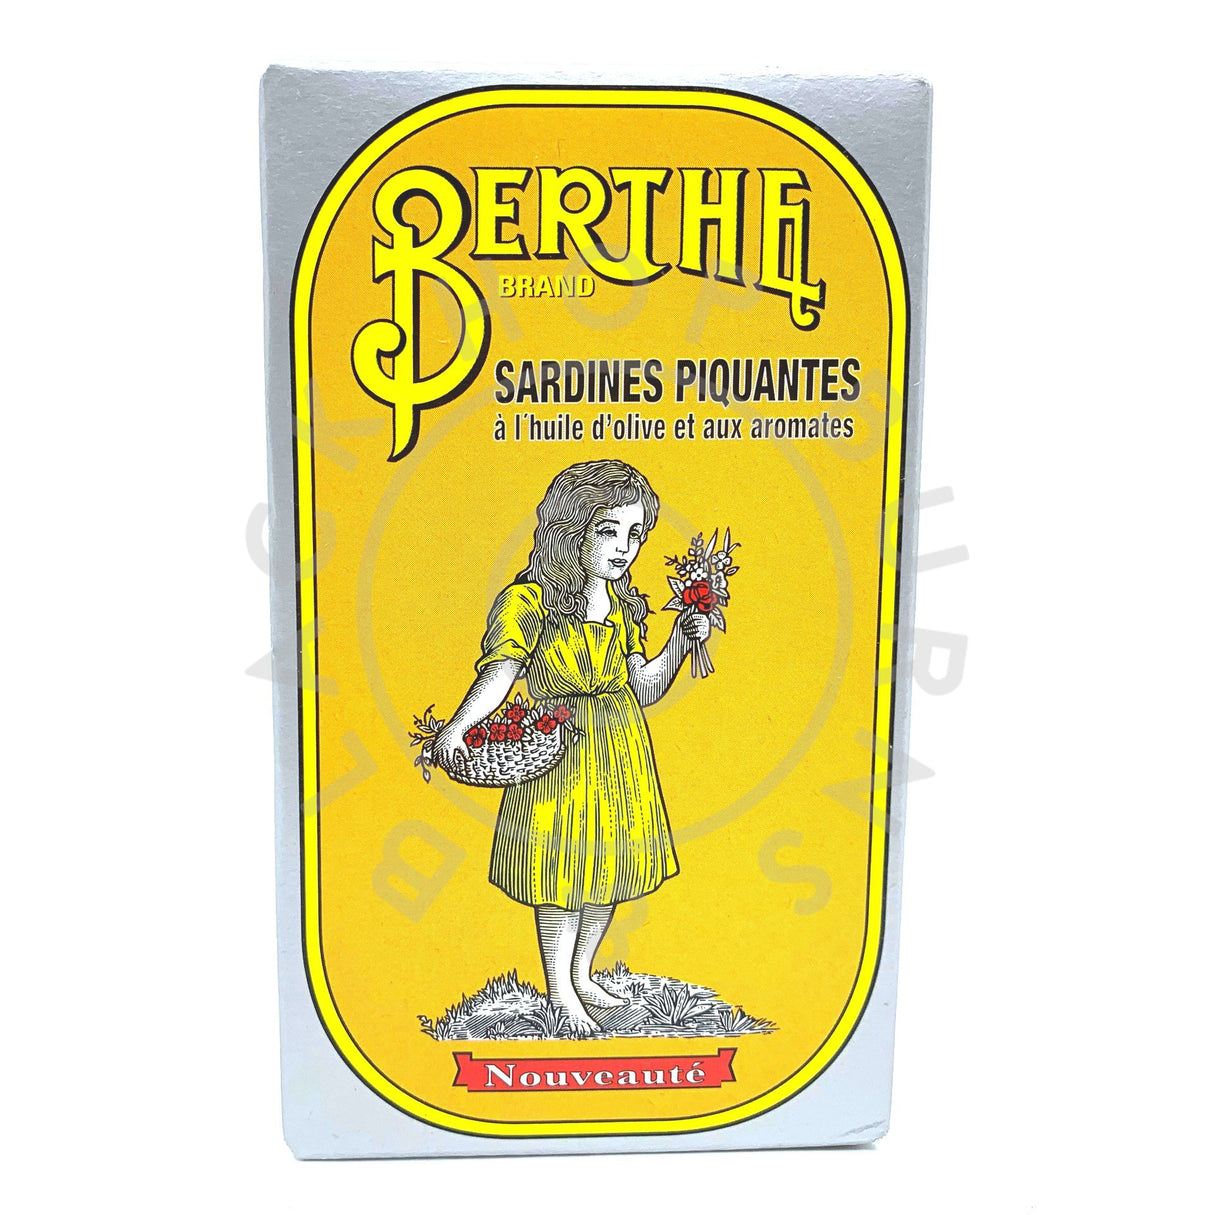 Berthe Sardines with Pickles and Chilli (125g)-Hop Burns & Black